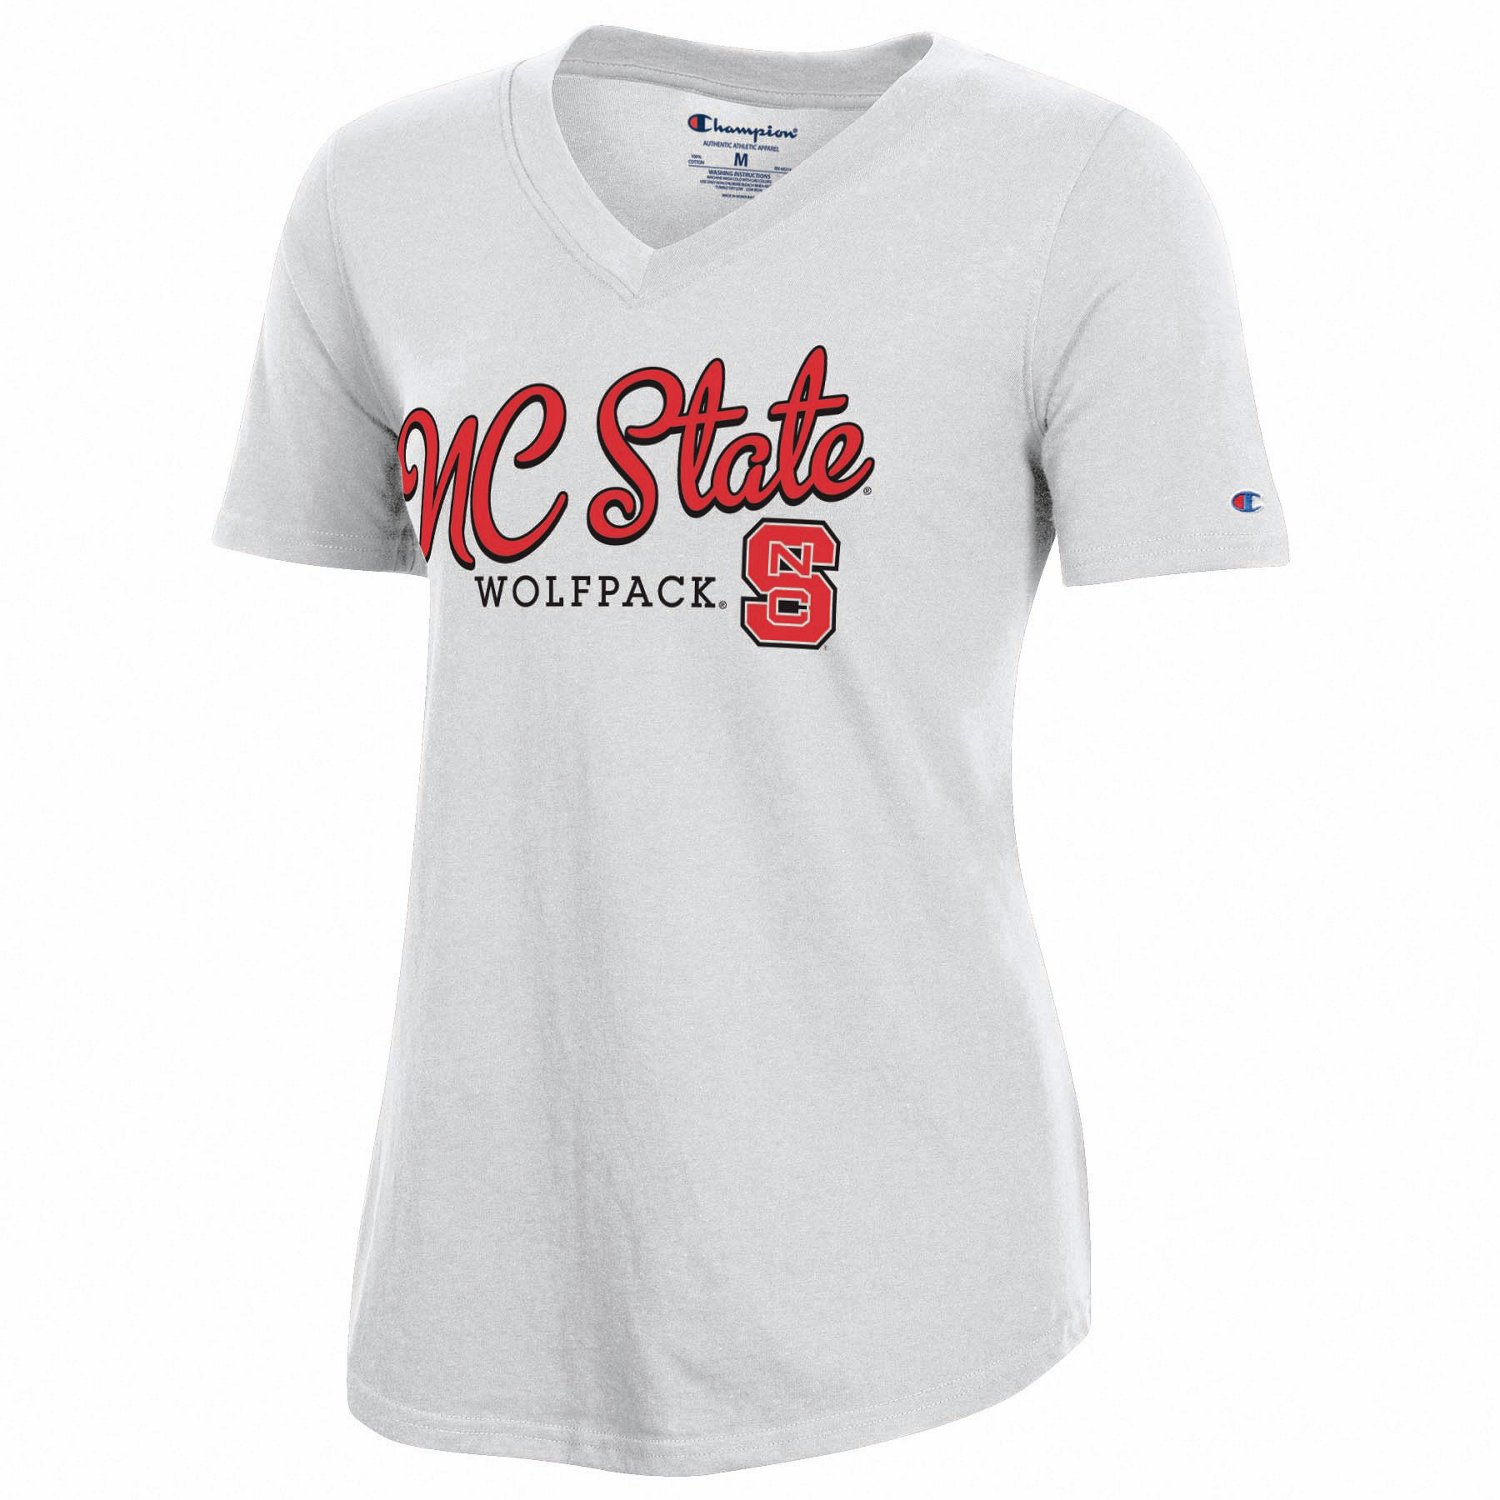 Champion Women's North Carolina State University Relaxed Fit V-neck T ...